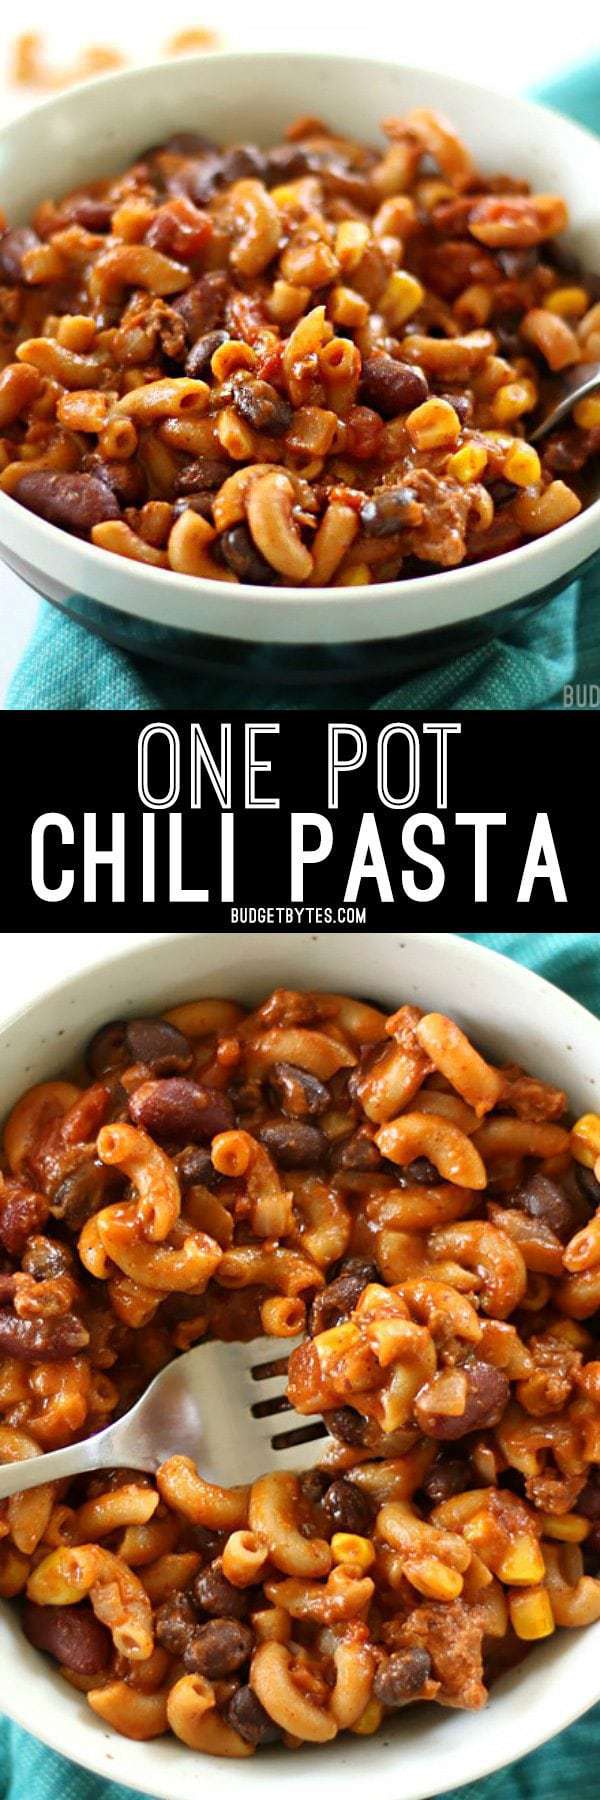 This super hearty One Pot Chili Pasta is bursting with southwest chili flavor, protein, and fiber. It's a meal in a bowl that the whole family will love. BudgetBytes.com